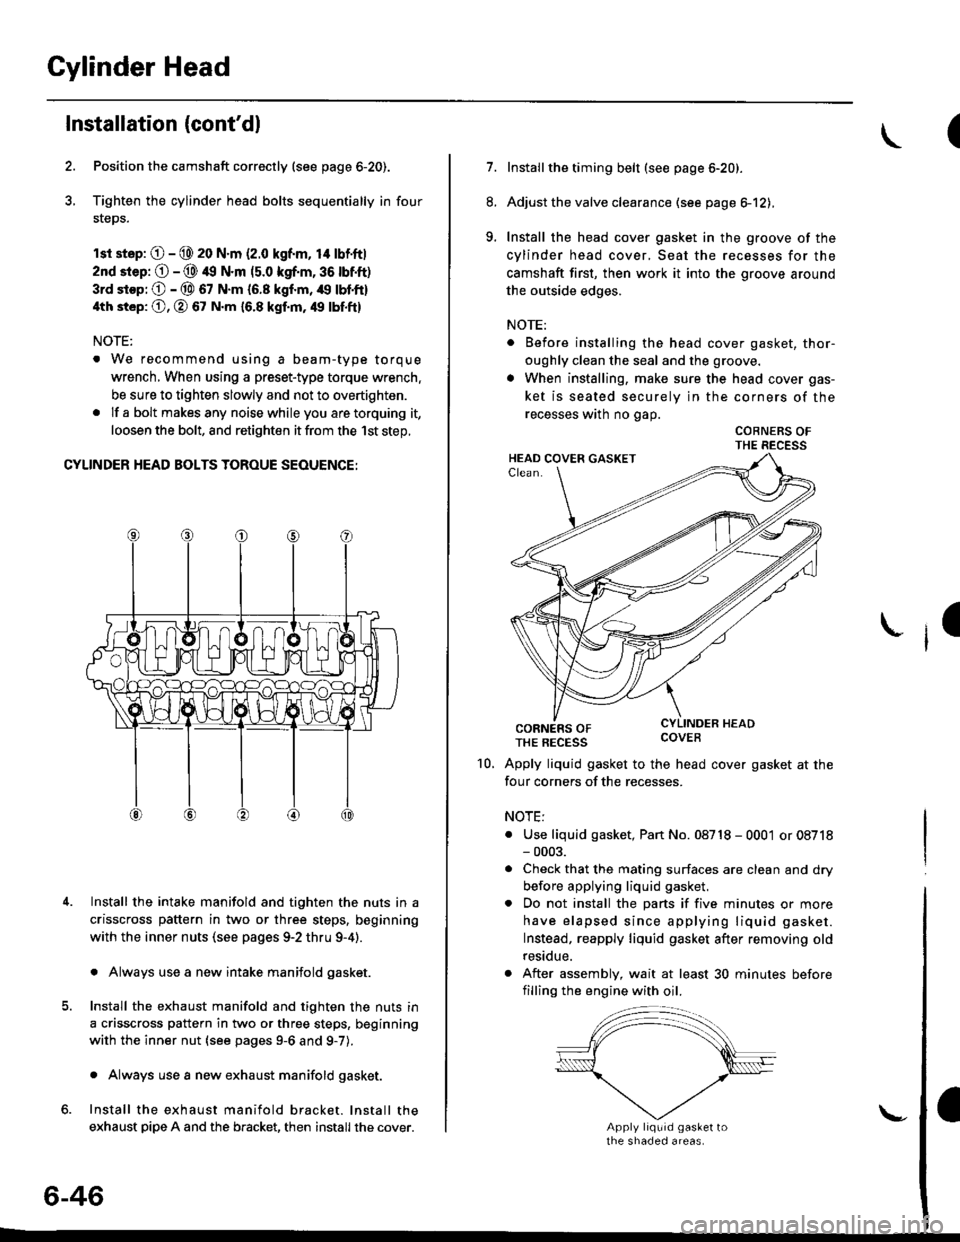 HONDA CIVIC 2000 6.G Workshop Manual Cylinder Head
Installation (contdl
Position the camshaft correctly (see page 6-20).
Tighten the cylinder head bolts sequentially in four
steps.
rsr st.p: O - @ 20 N.m (2.0 kgf.m, 14 lbfft|
2nd srep: